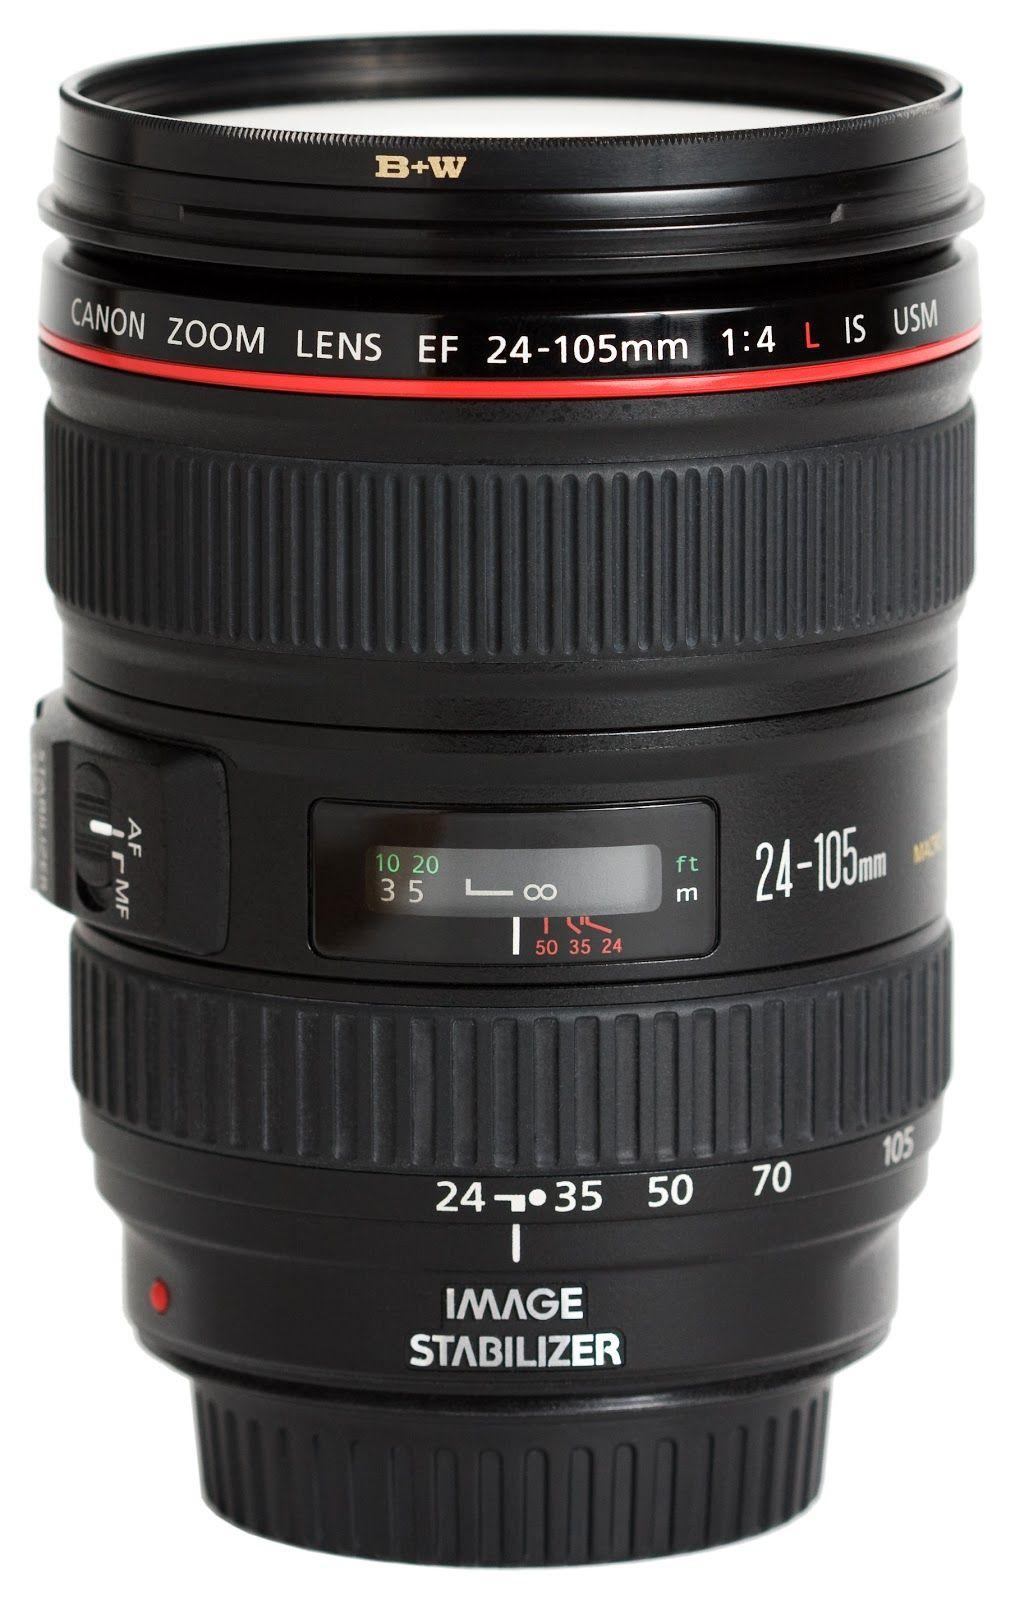 Canon 24-105 L Lens 1 Aperture range f/4-22 Wide angle to telephoto zoom lens